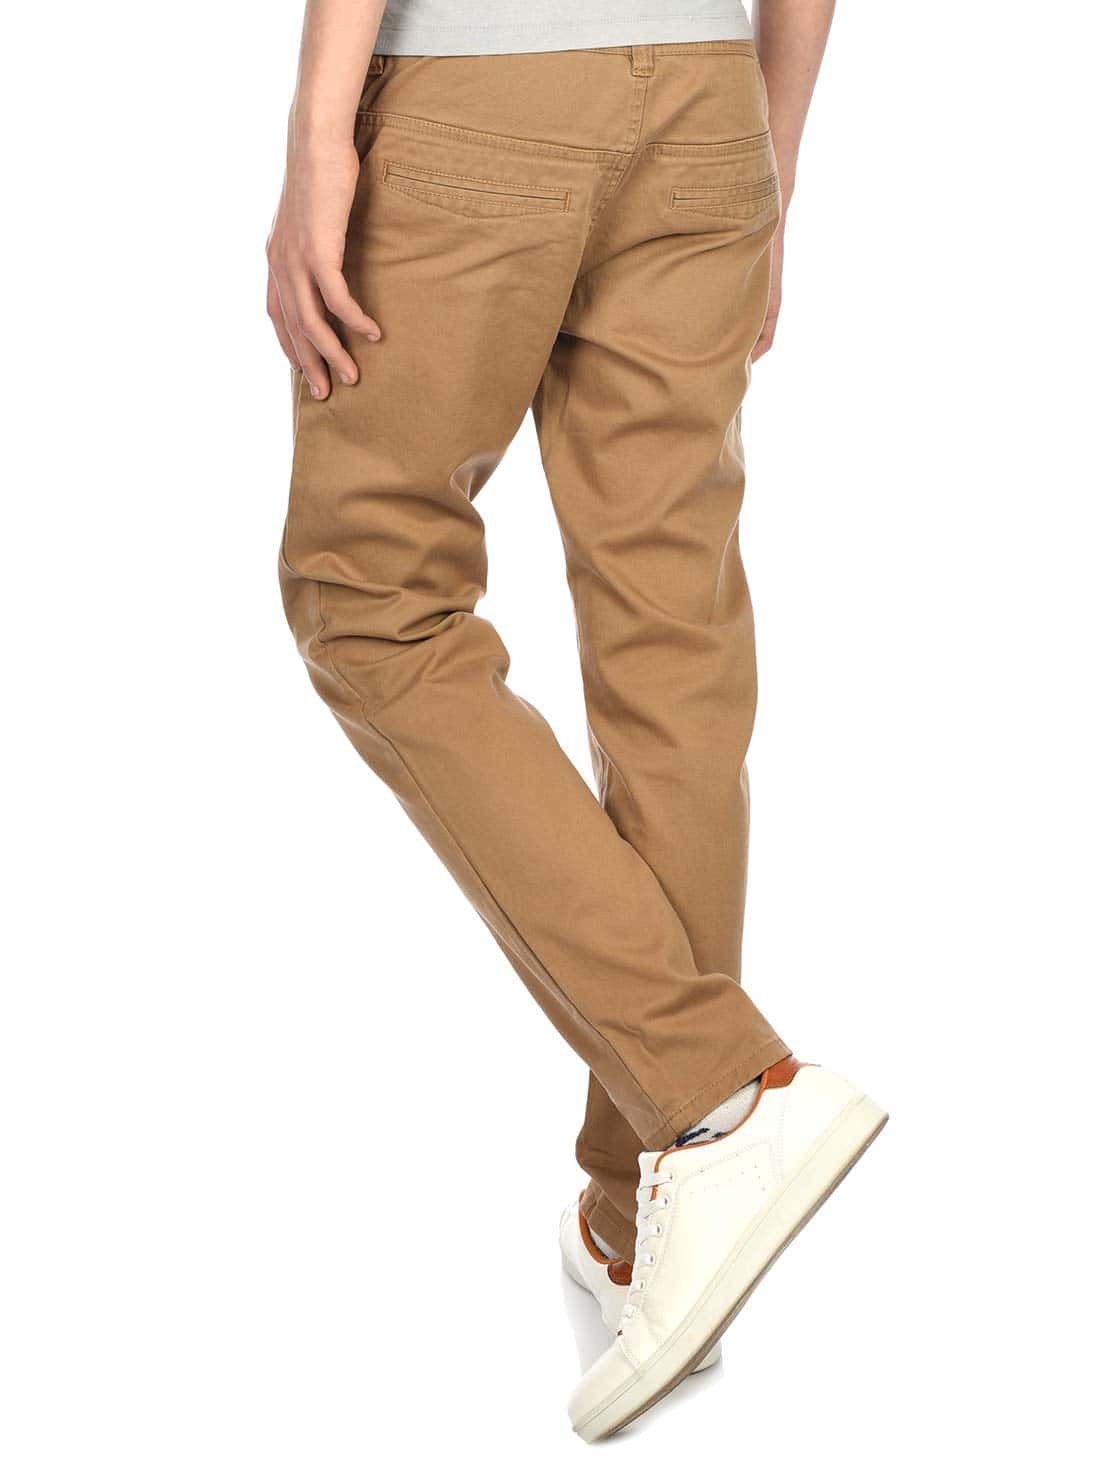 Jungen casual Chino Hose Chinohose (1-tlg) Beige BEZLIT